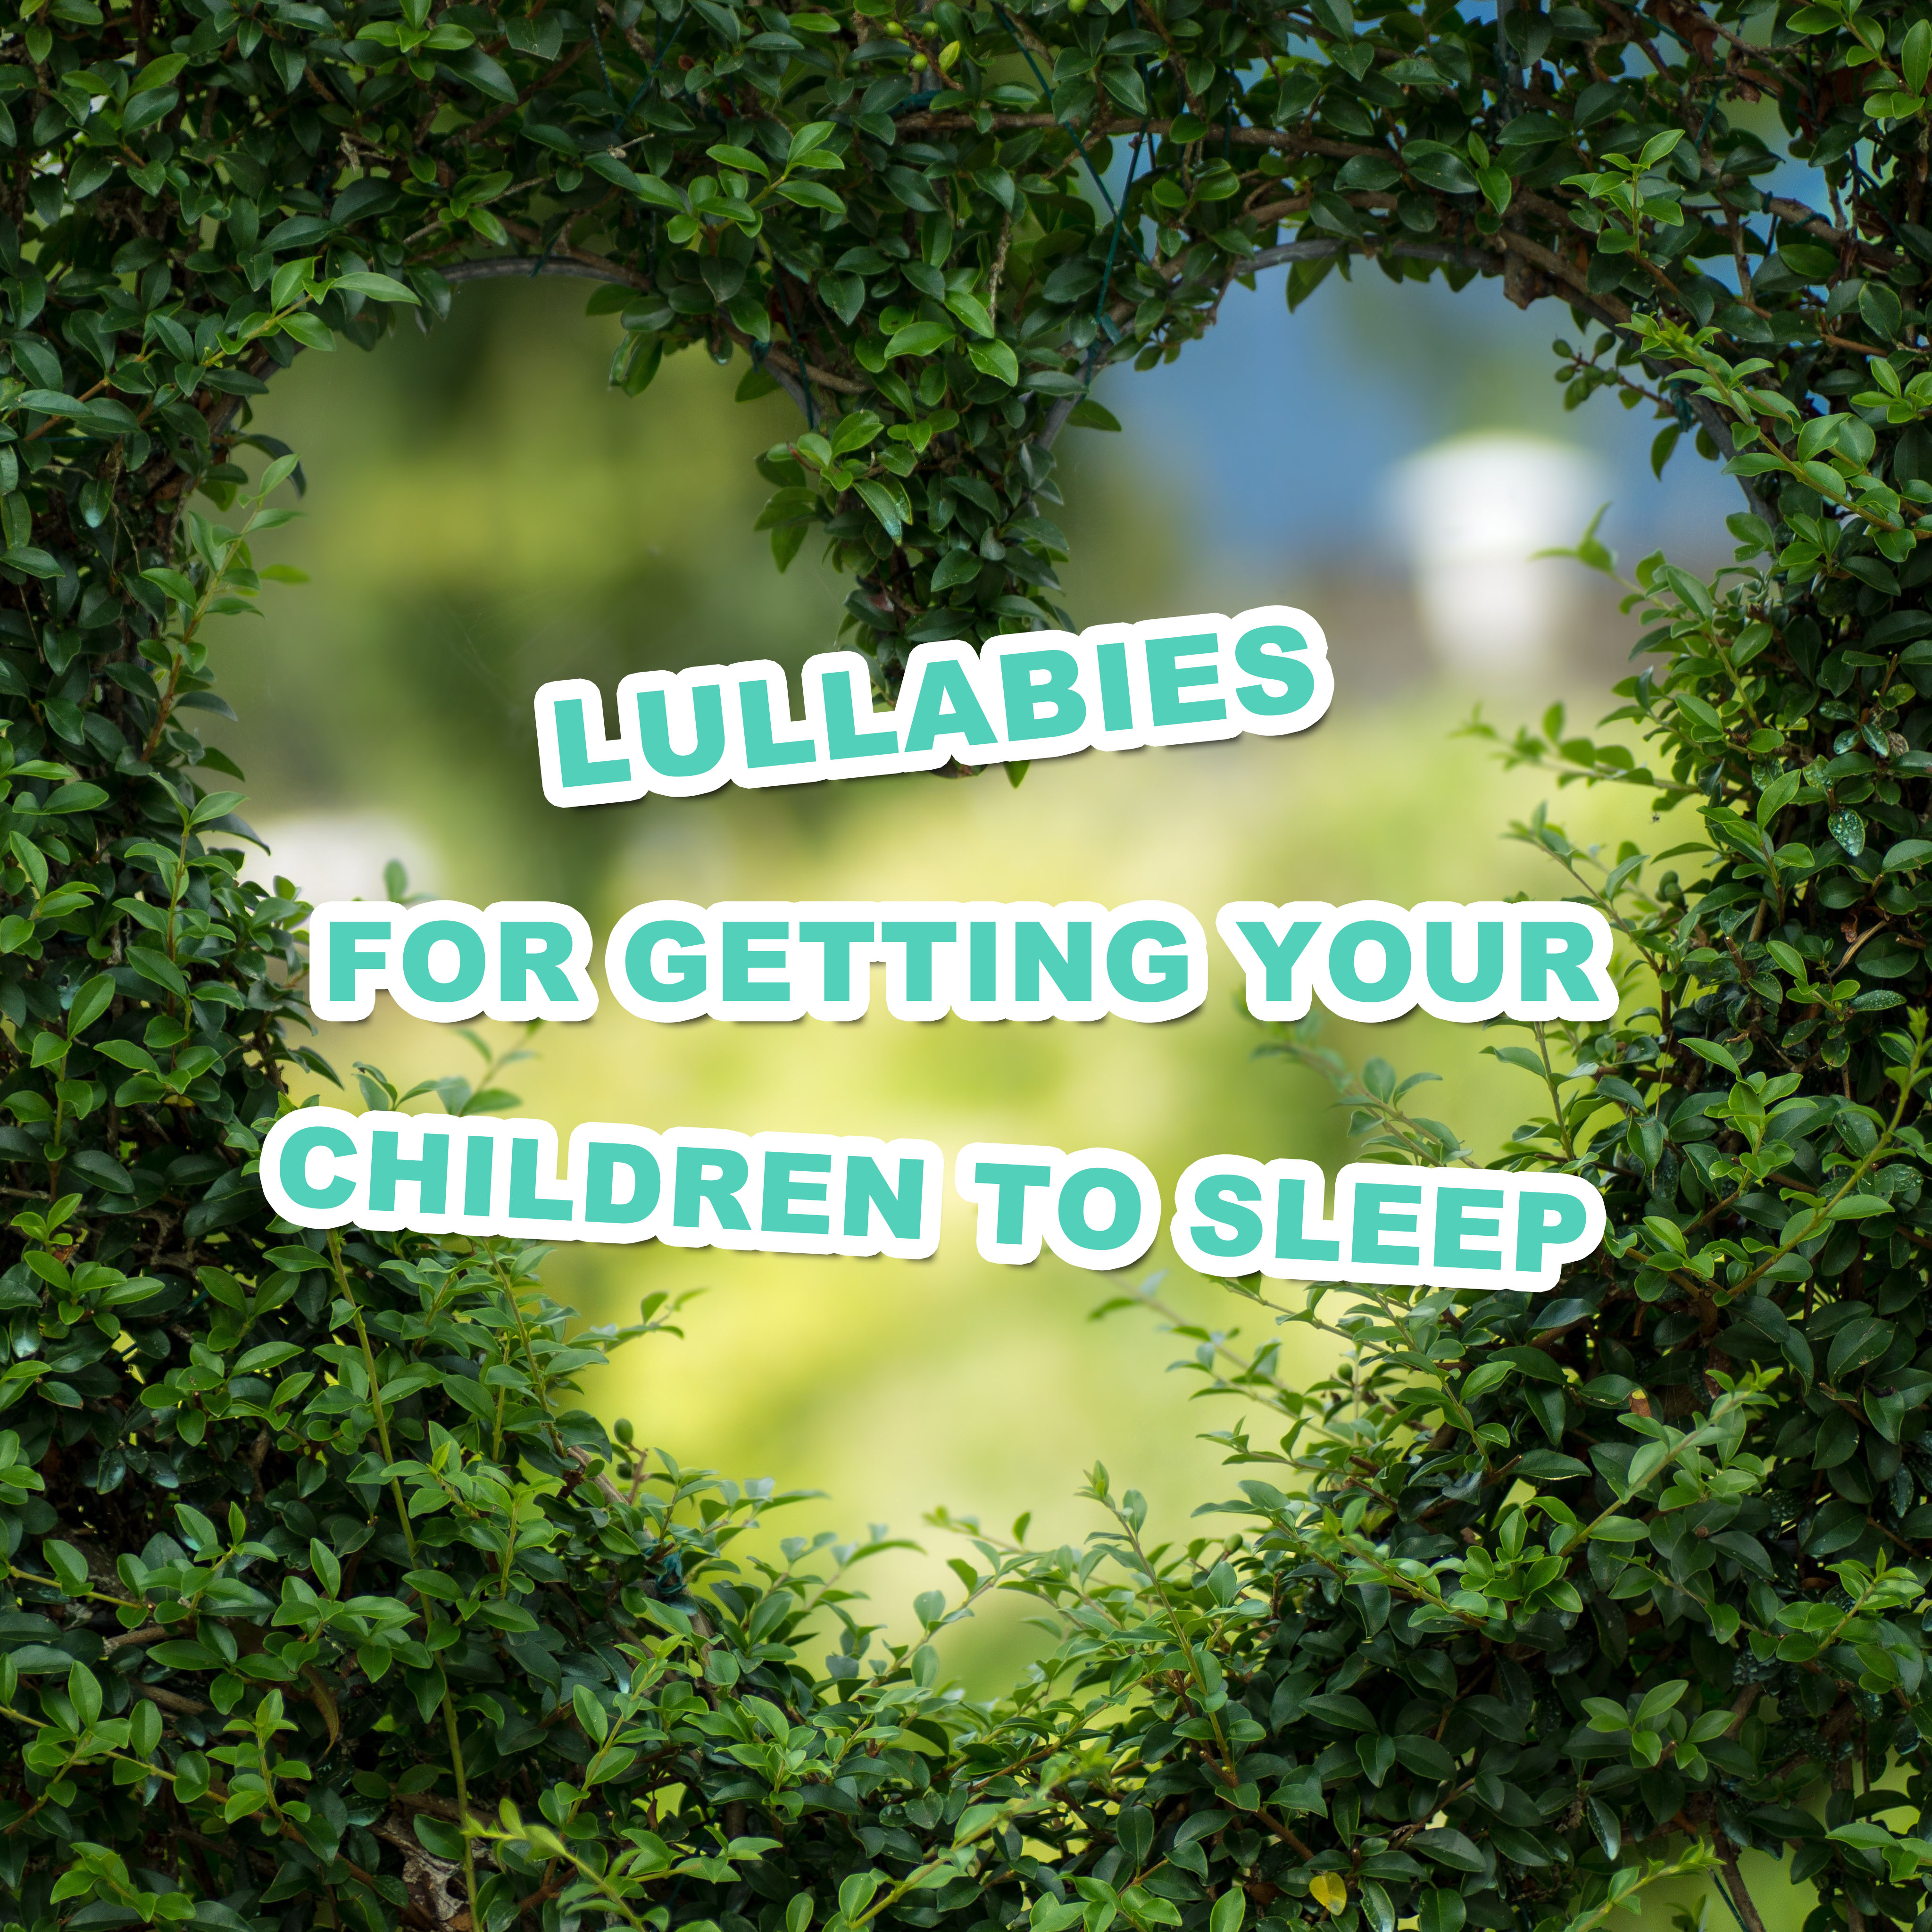 15 Lullabies for Getting Your Children to Sleep